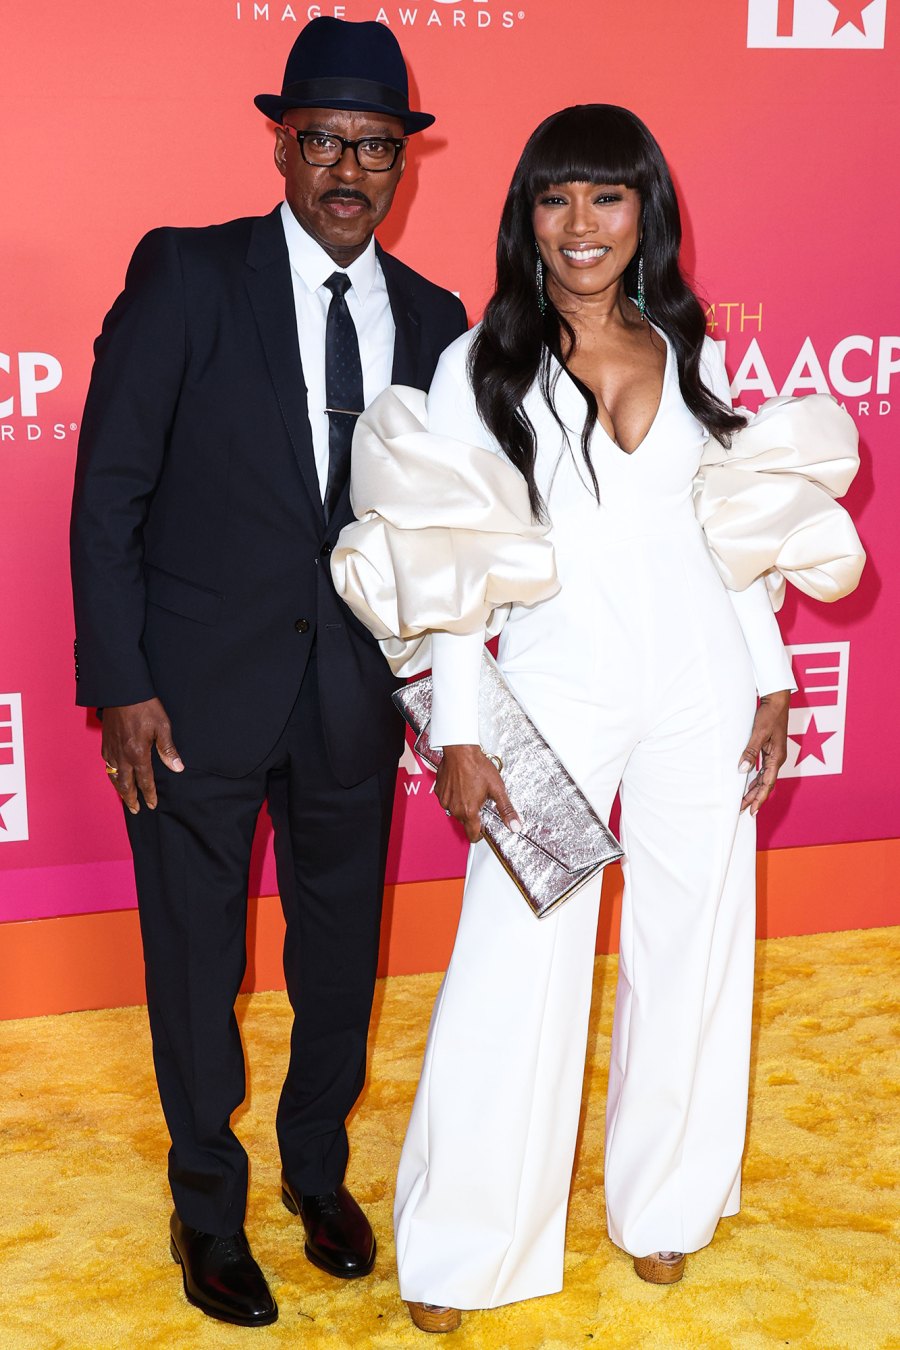 Angela Bassett and Courtney B. Vance’s Relationship Timeline: From Yale Classmates to Marriage